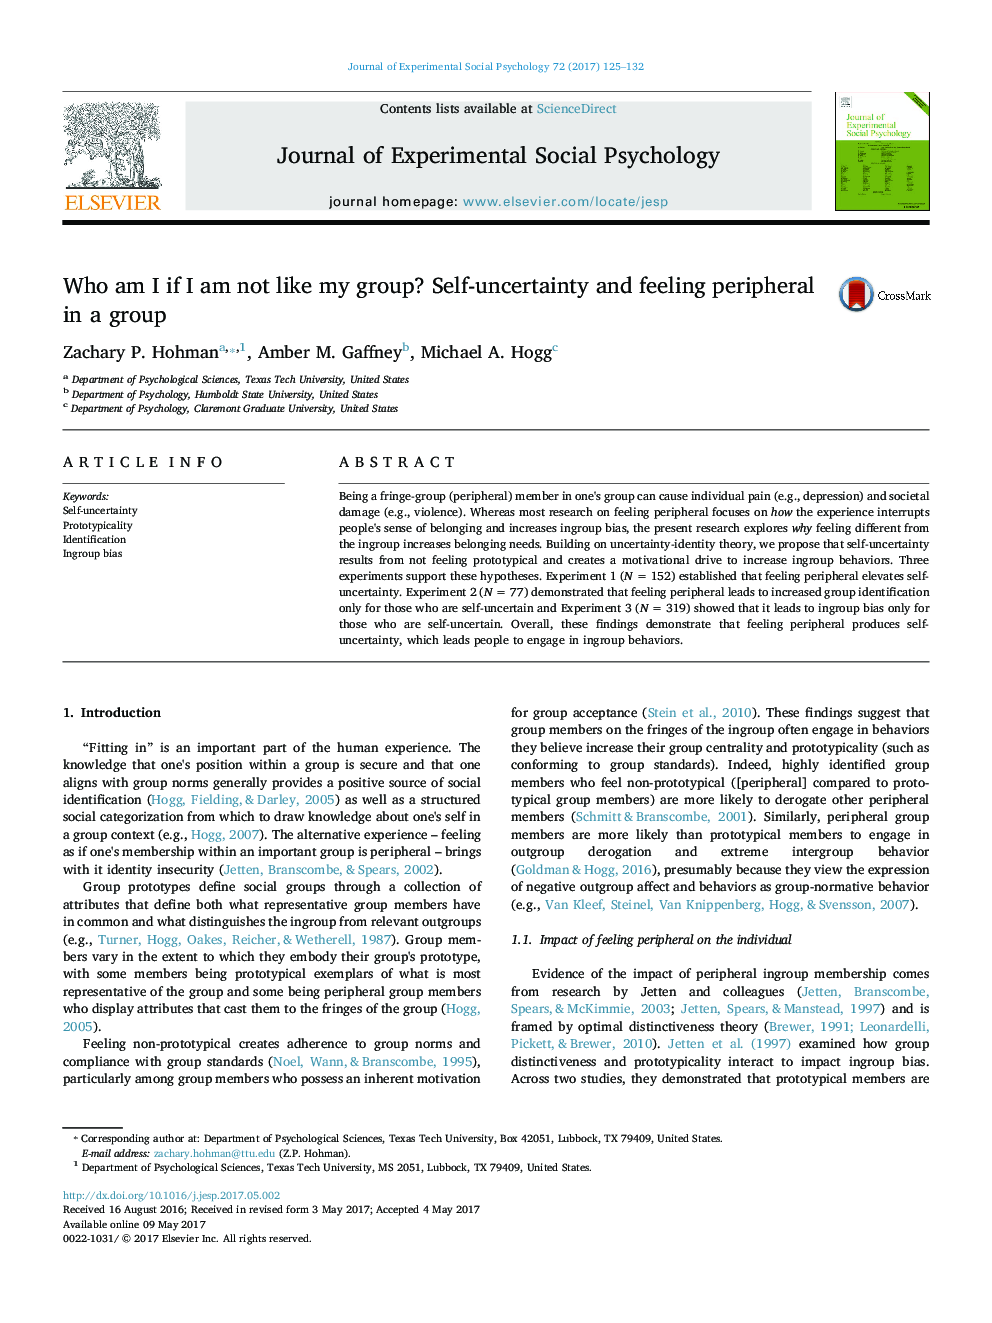 Who am I if I am not like my group? Self-uncertainty and feeling peripheral in a group